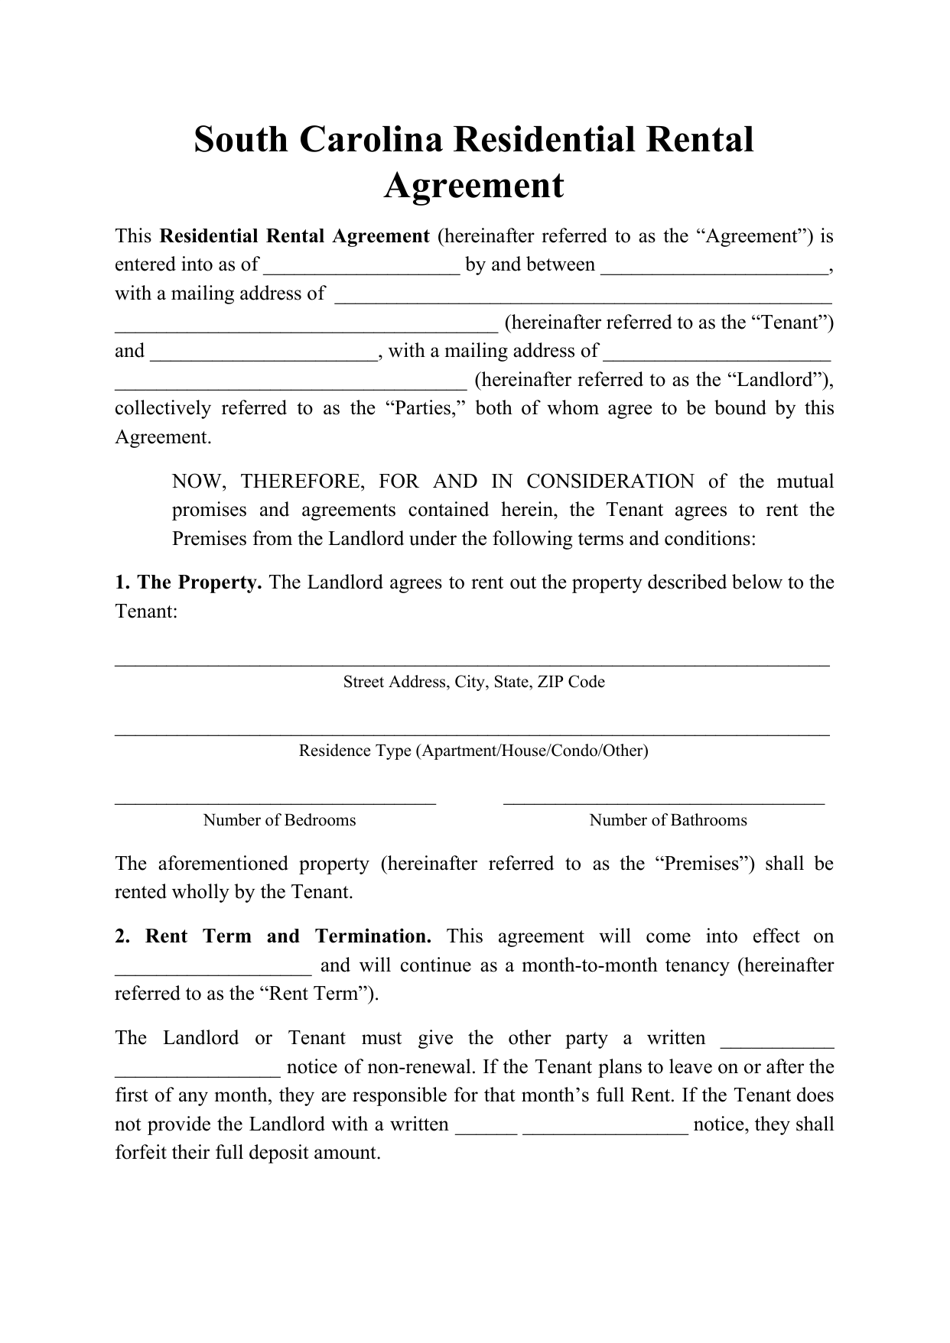 Residential Rental Agreement Template - South Carolina, Page 1